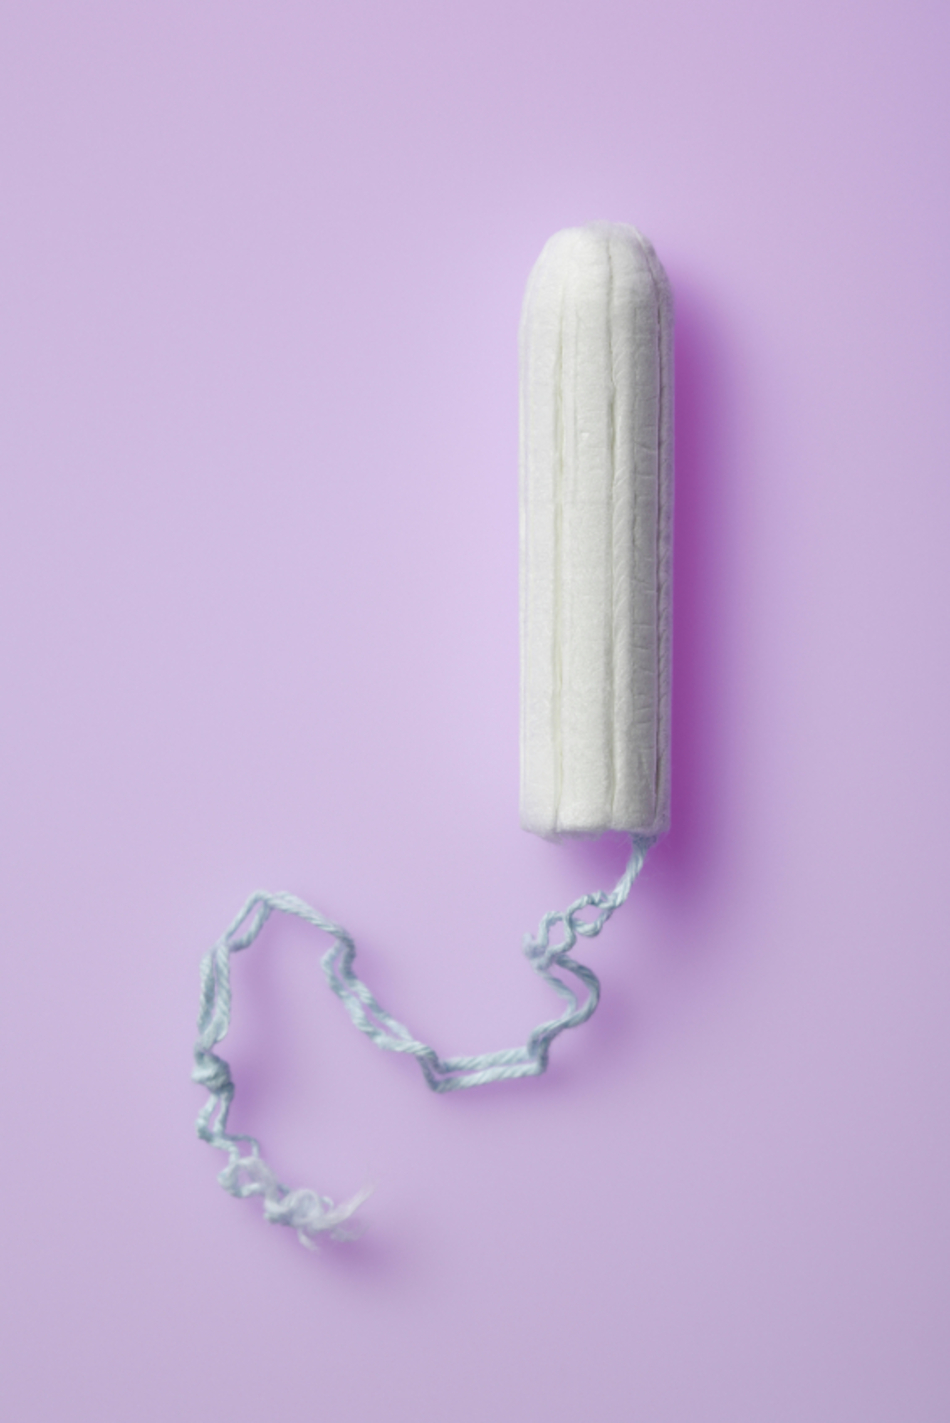 My Periods Are Weird – Am I Normal?